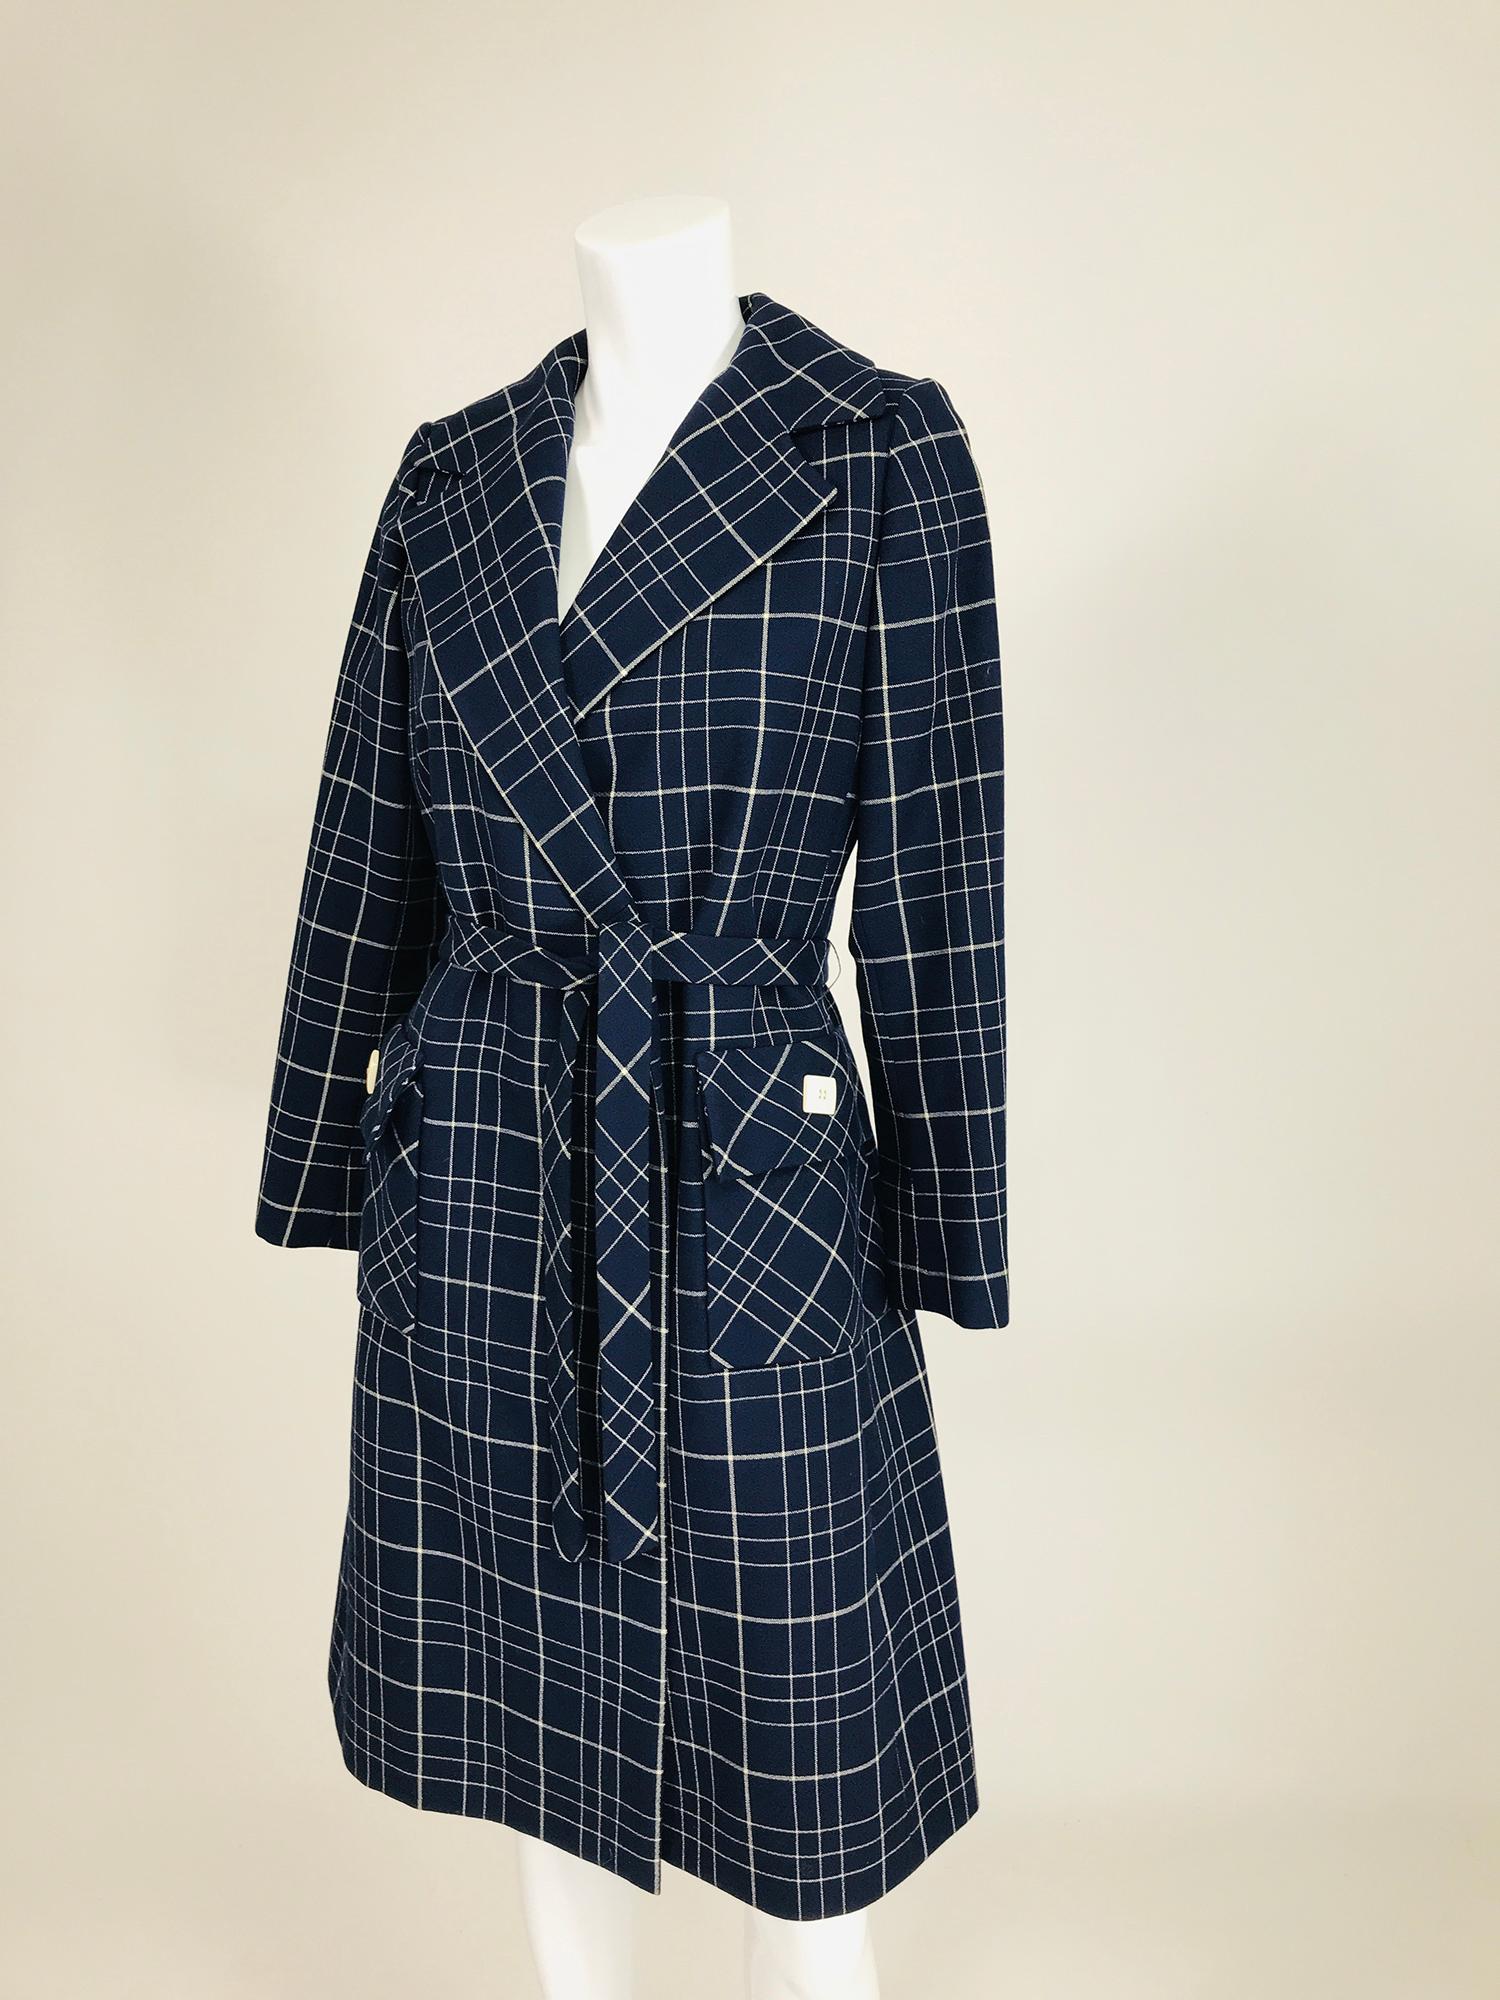 Adele Simpson 1960s navy blue & white wool plaid wrap coat. Stylish, well made coat that will get you complements where ever you go. The woven plaid design is perfectly matched throughout the garment, something rarely found in today's ready to wear